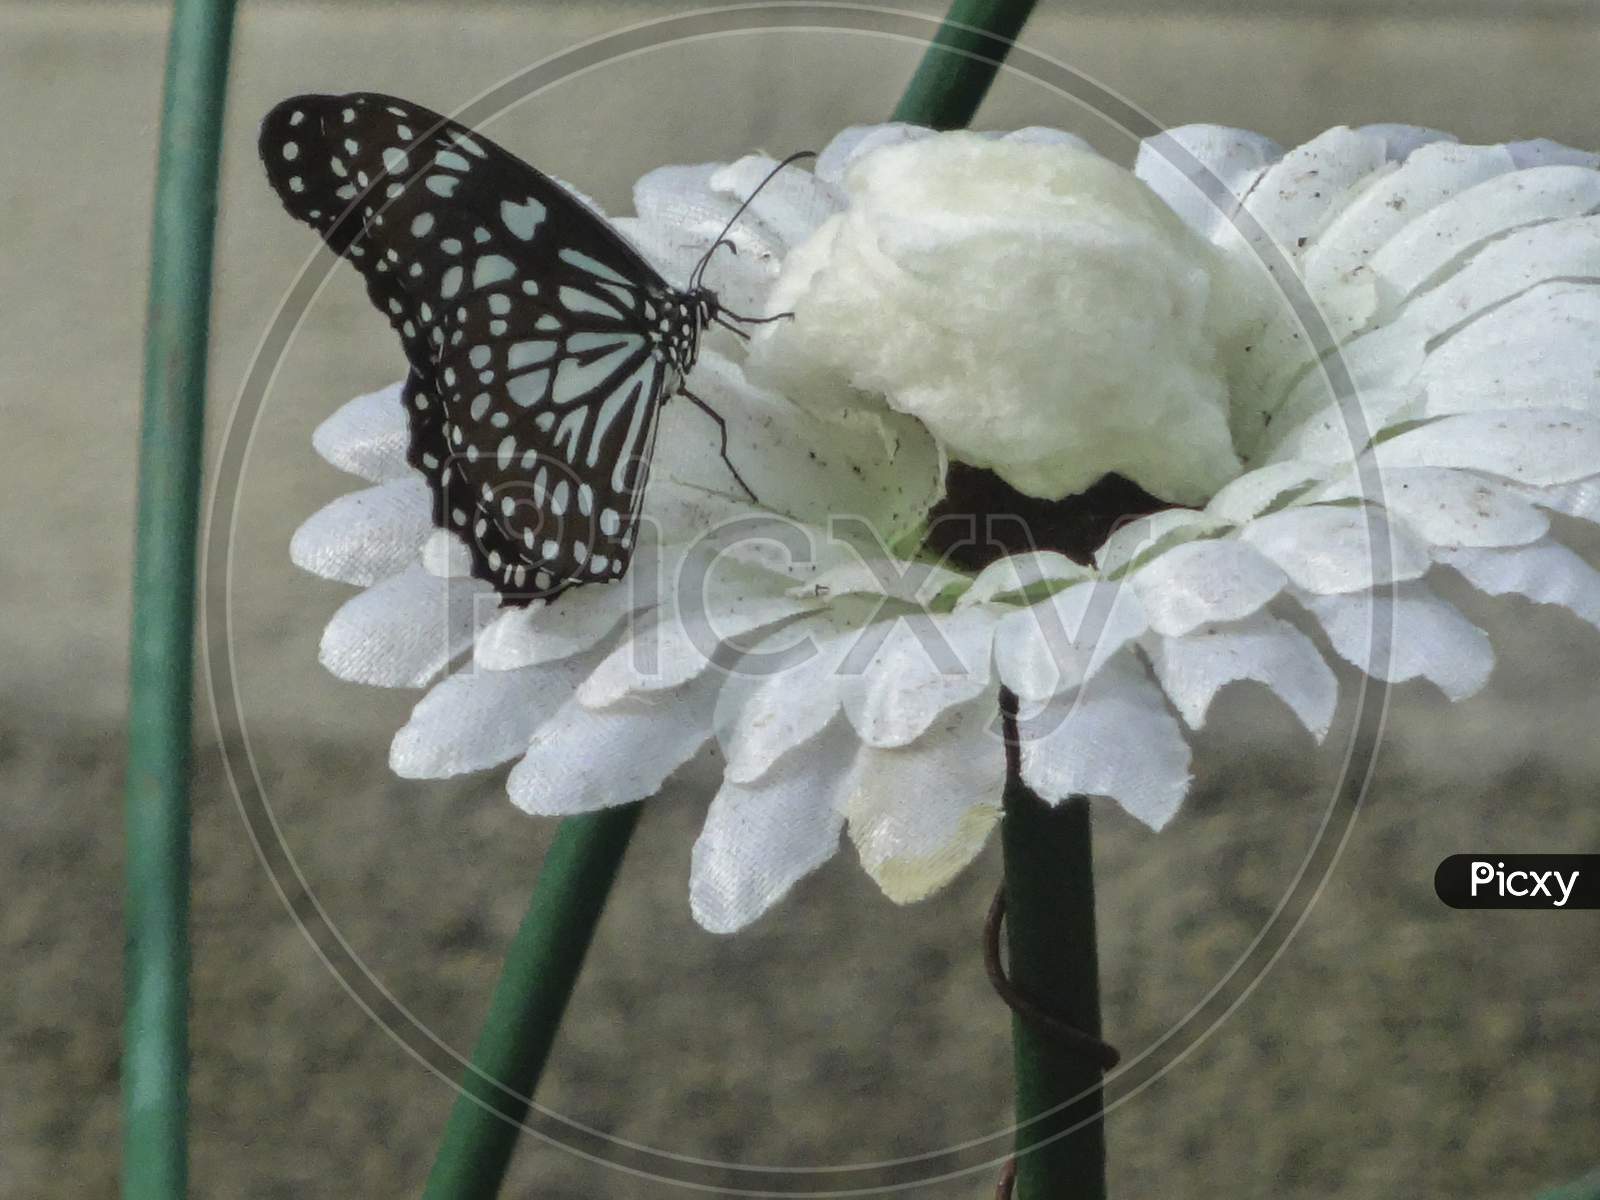 Butterfly feeding on artificial nectar on white flower